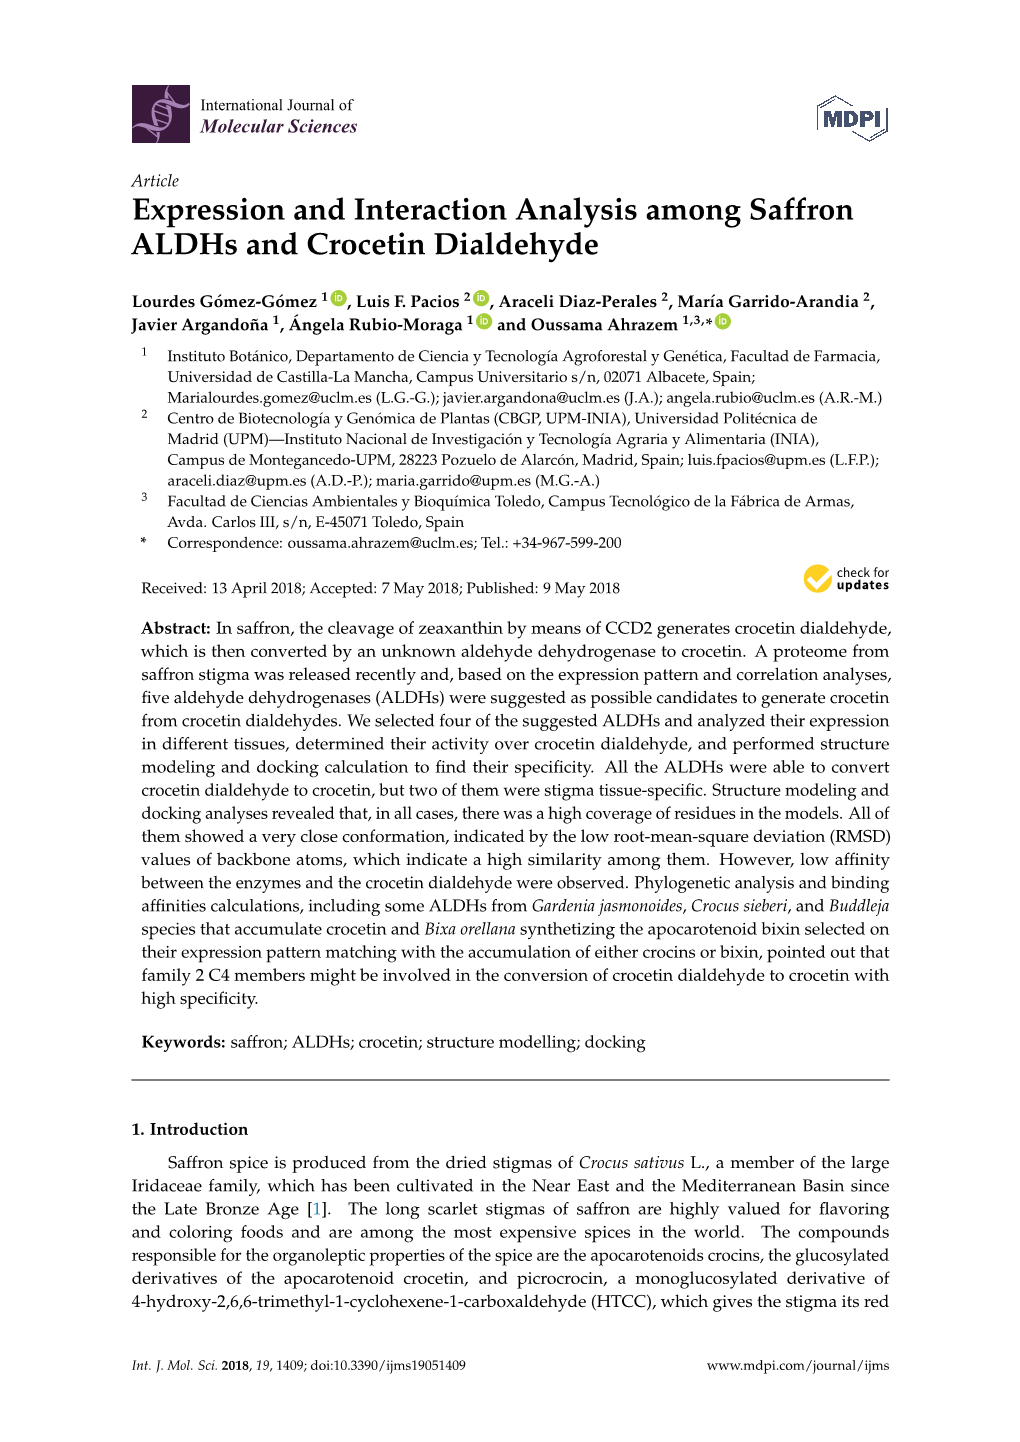 Expression and Interaction Analysis Among Saffron Aldhs and Crocetin Dialdehyde